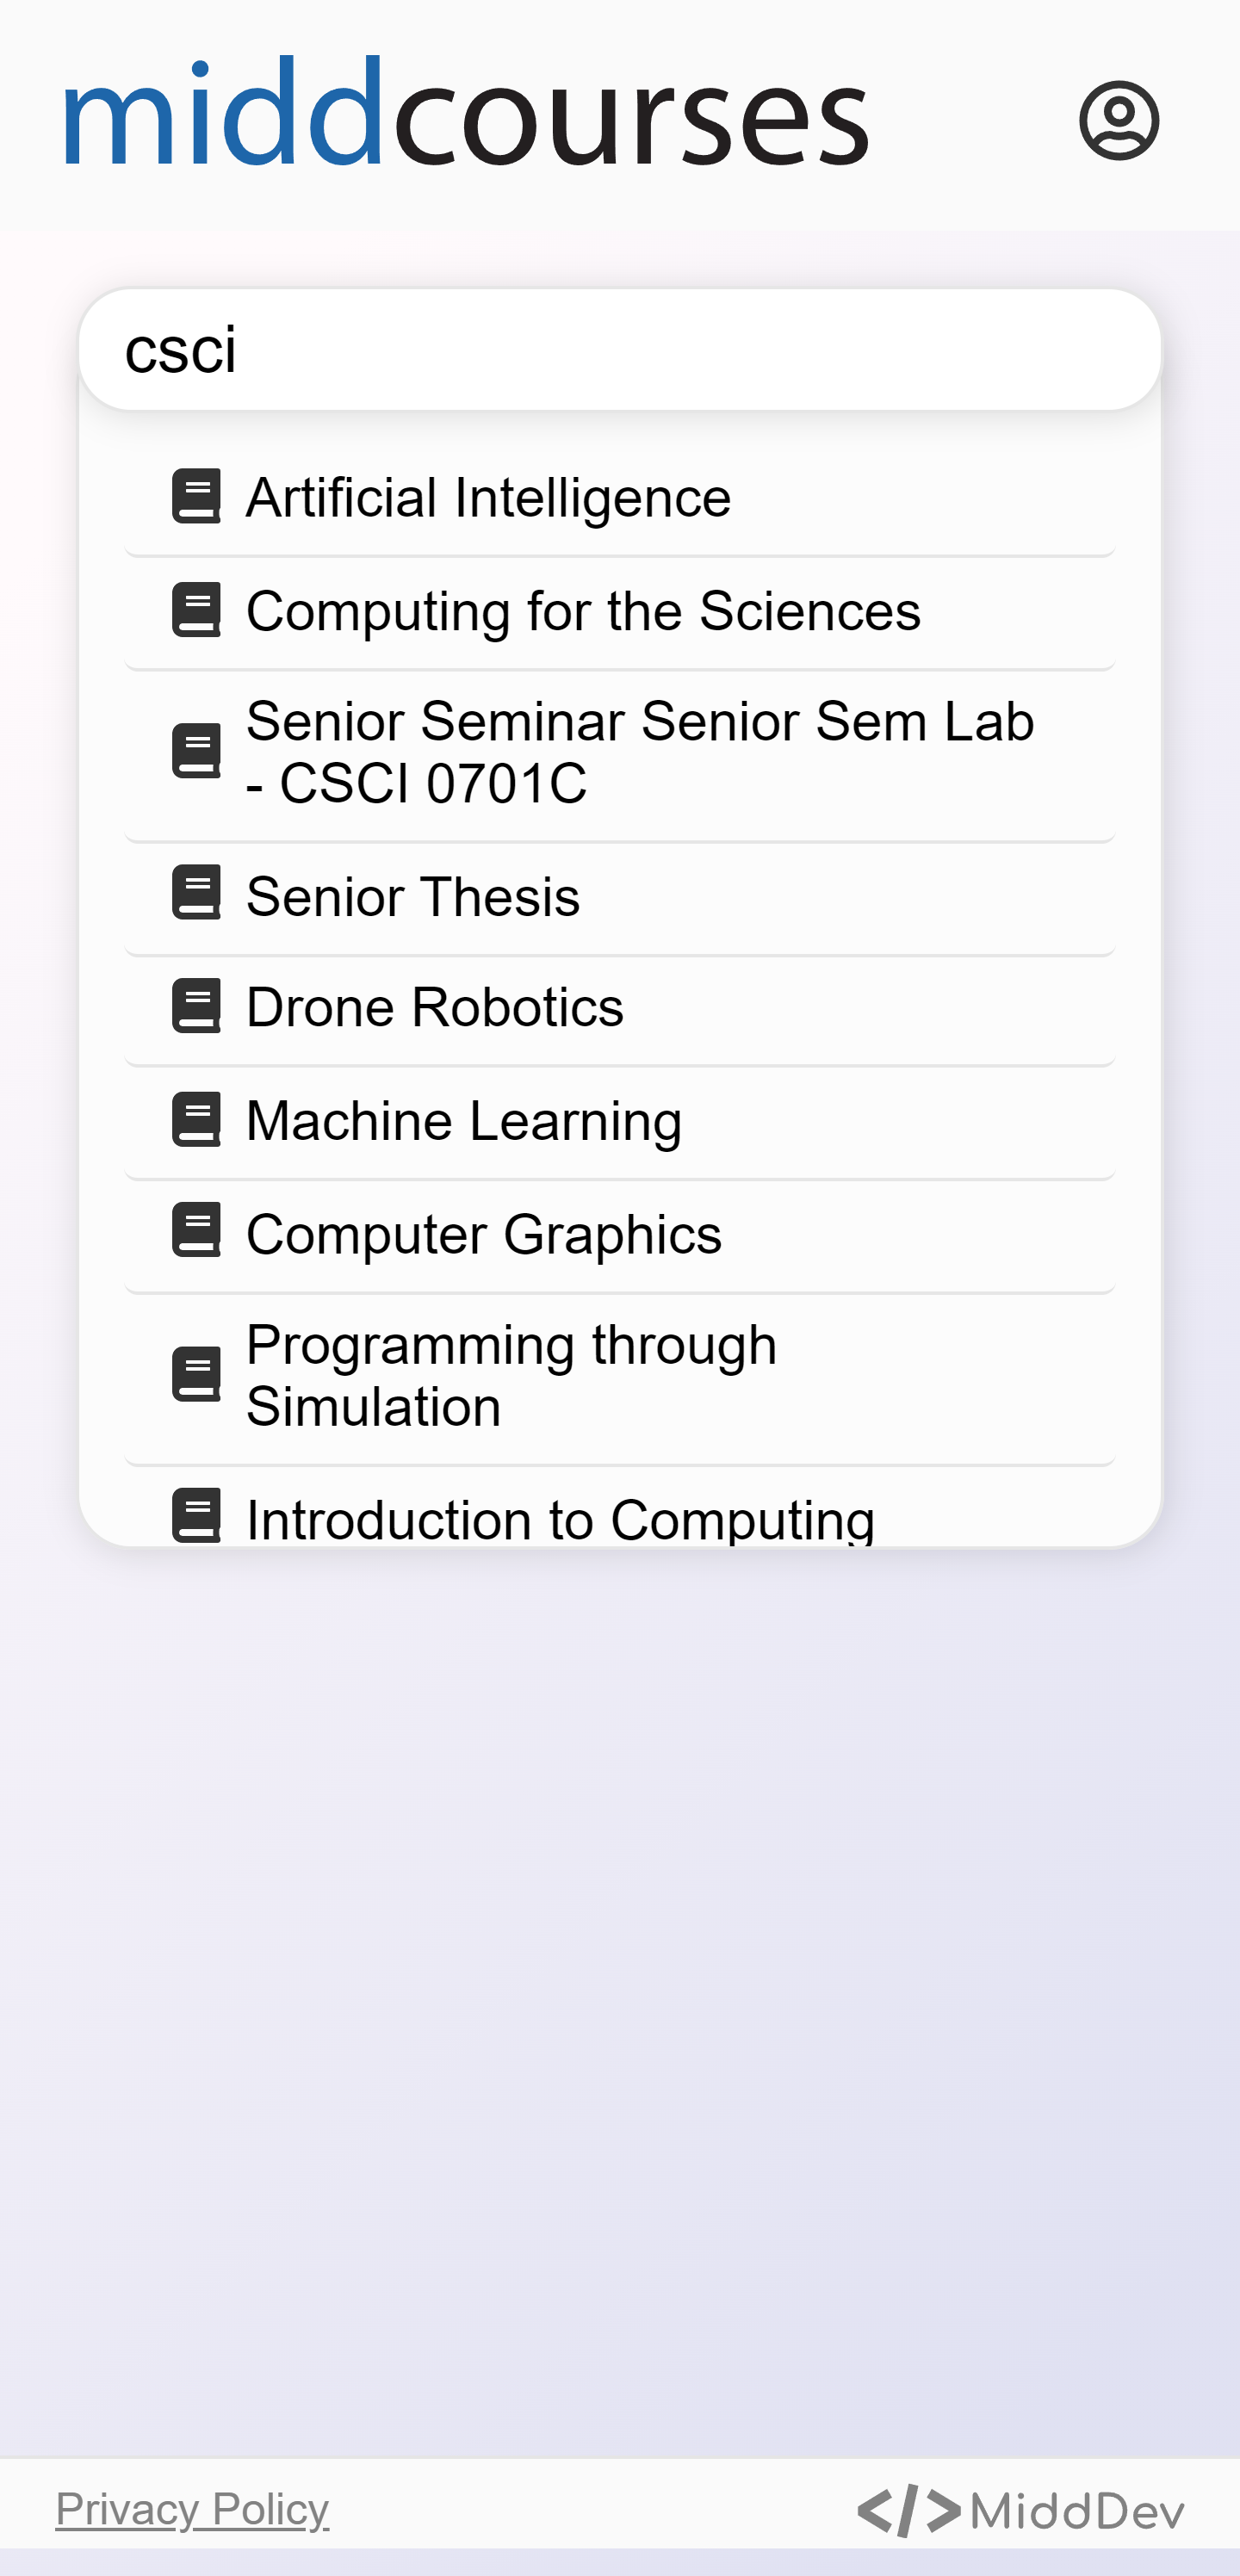 The homepage of midd.courses